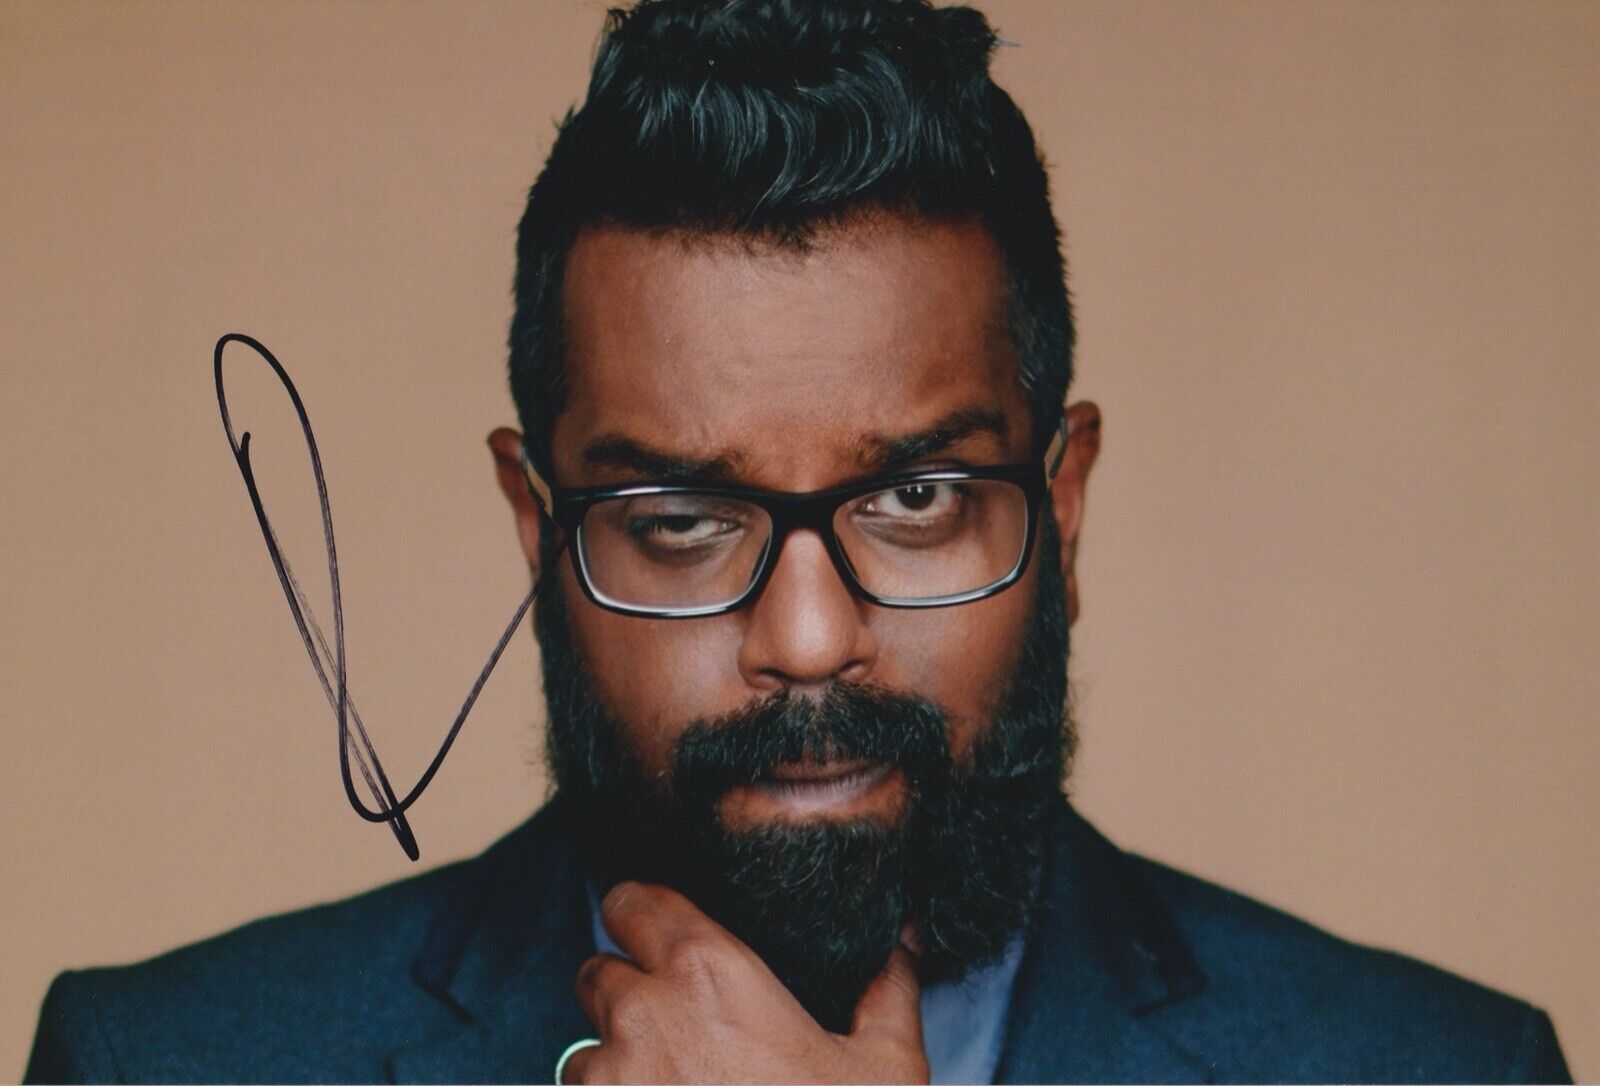 ROMESH RANGANATHAN HAND SIGNED 12X8 Photo Poster painting - TV AUTOGRAPH - STAND UP COMEDIAN 4